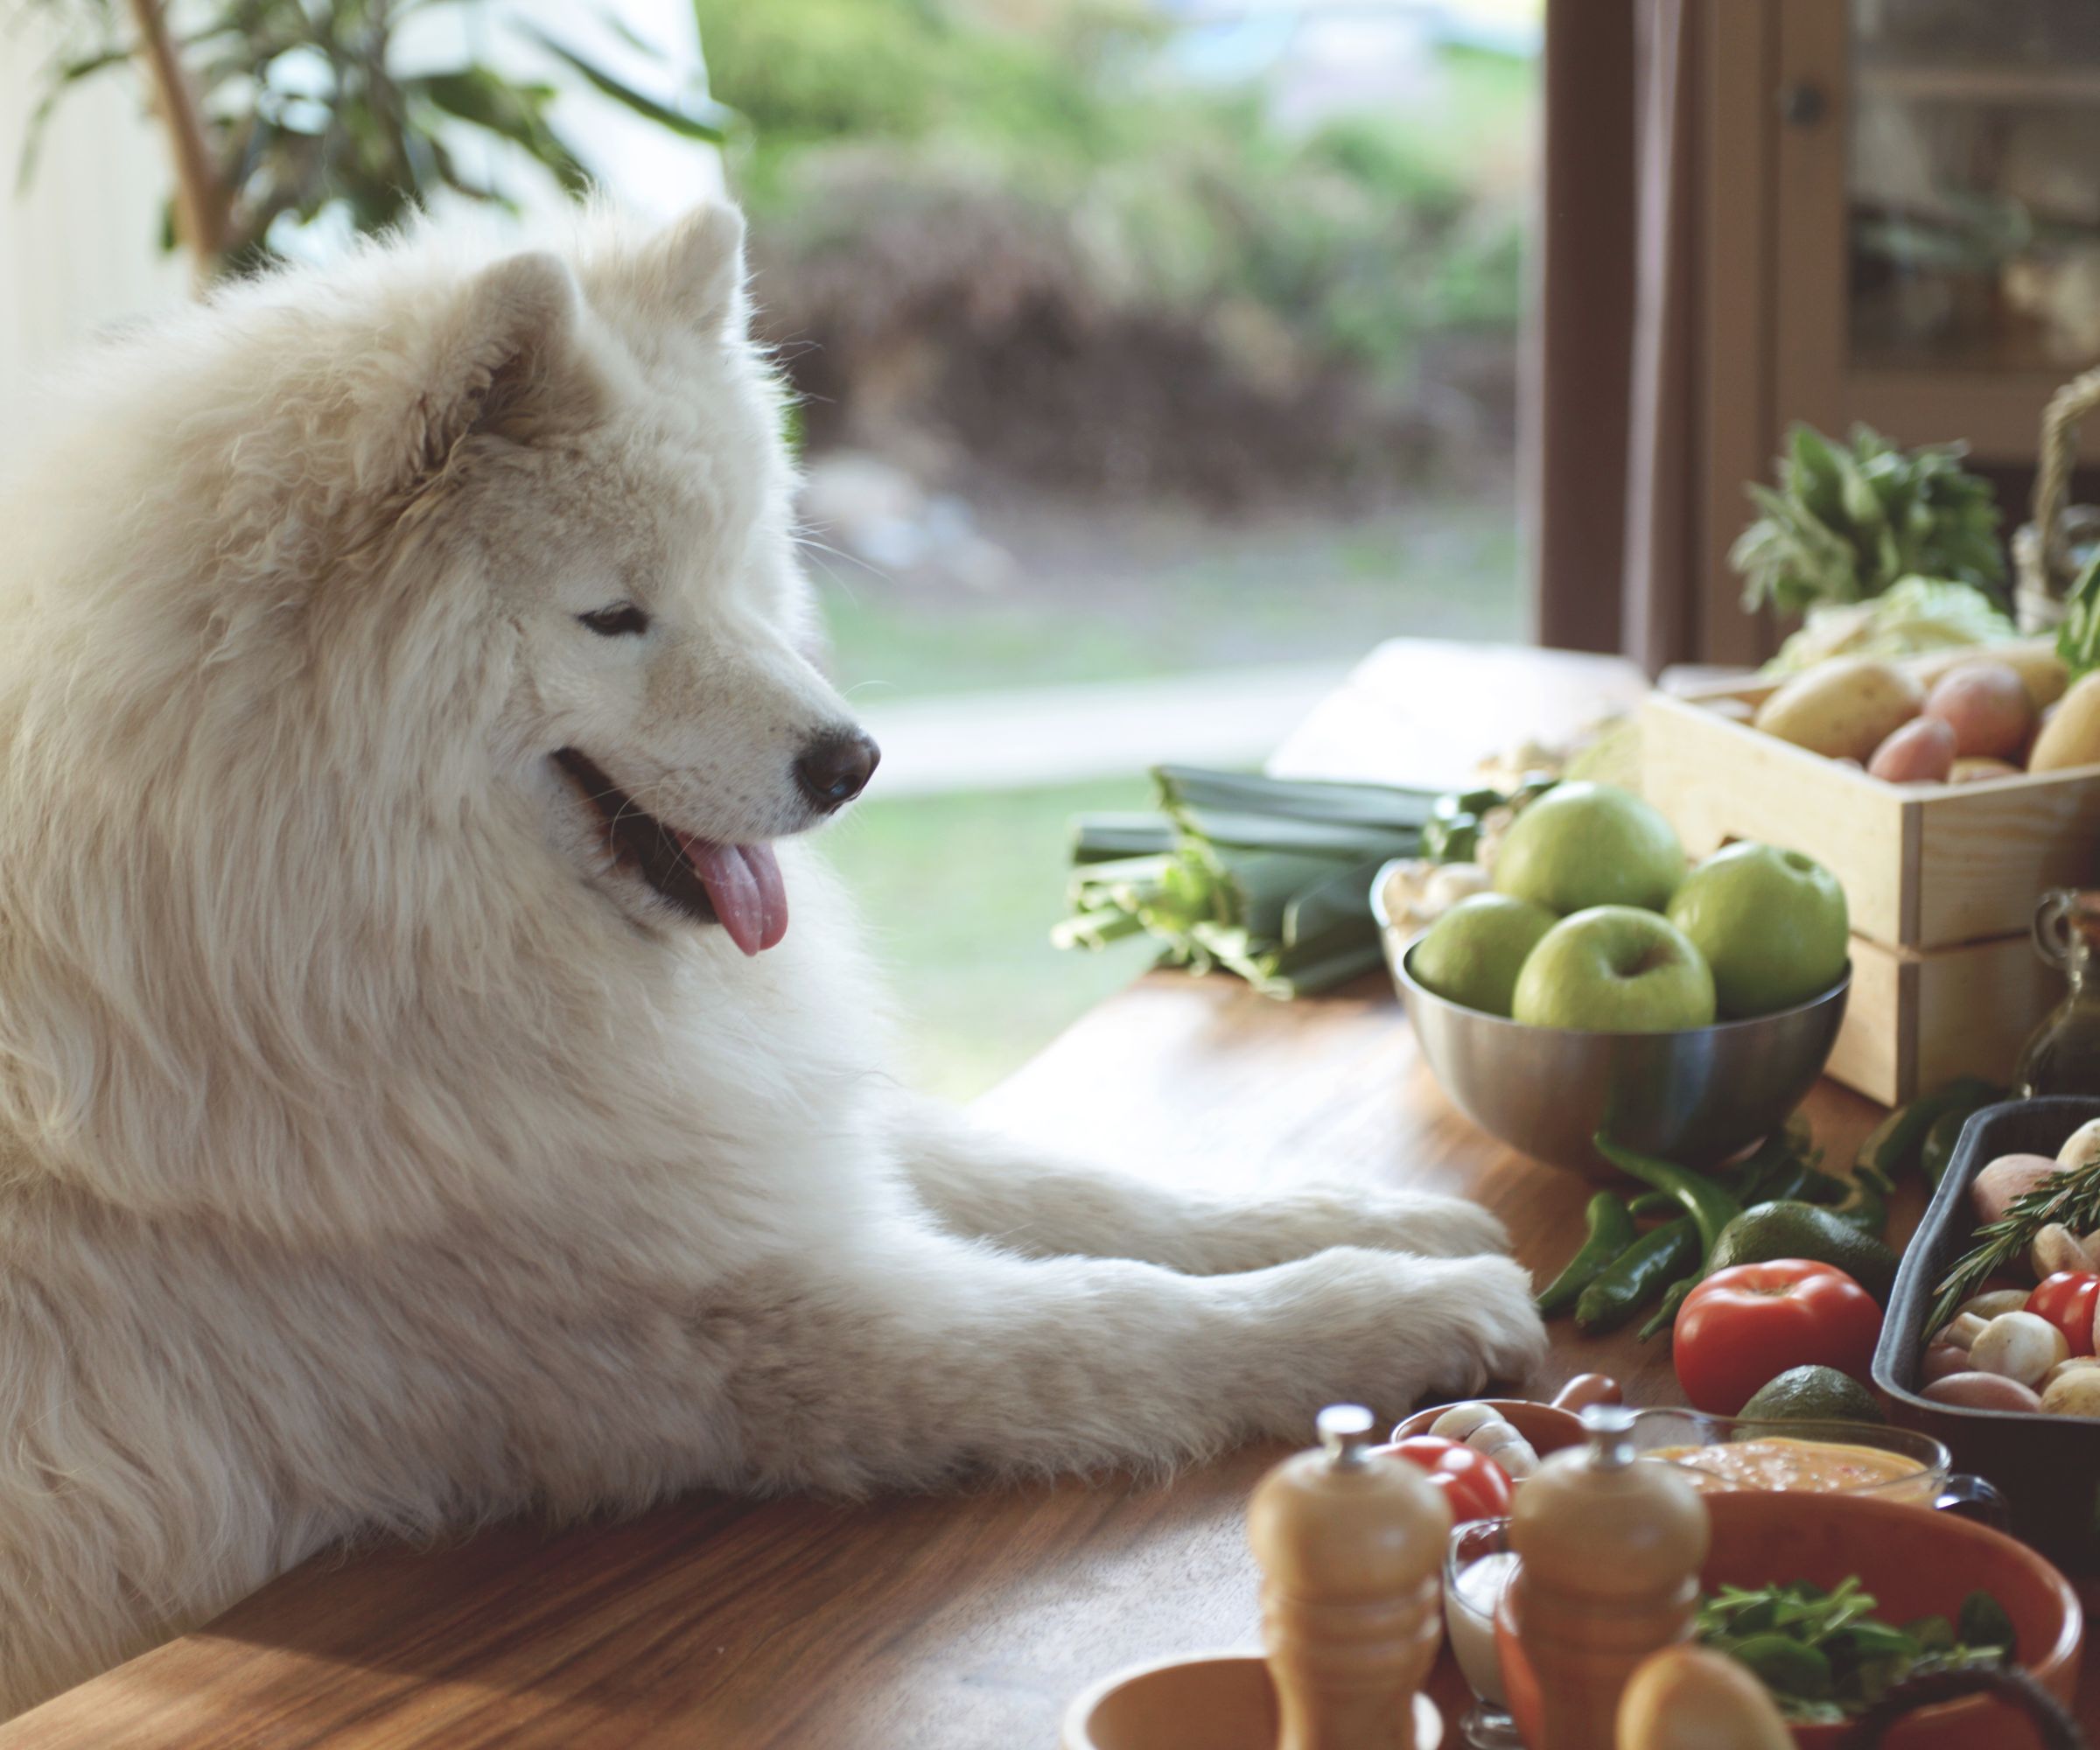 How to keep pets off counters: expert tips for dogs and cats